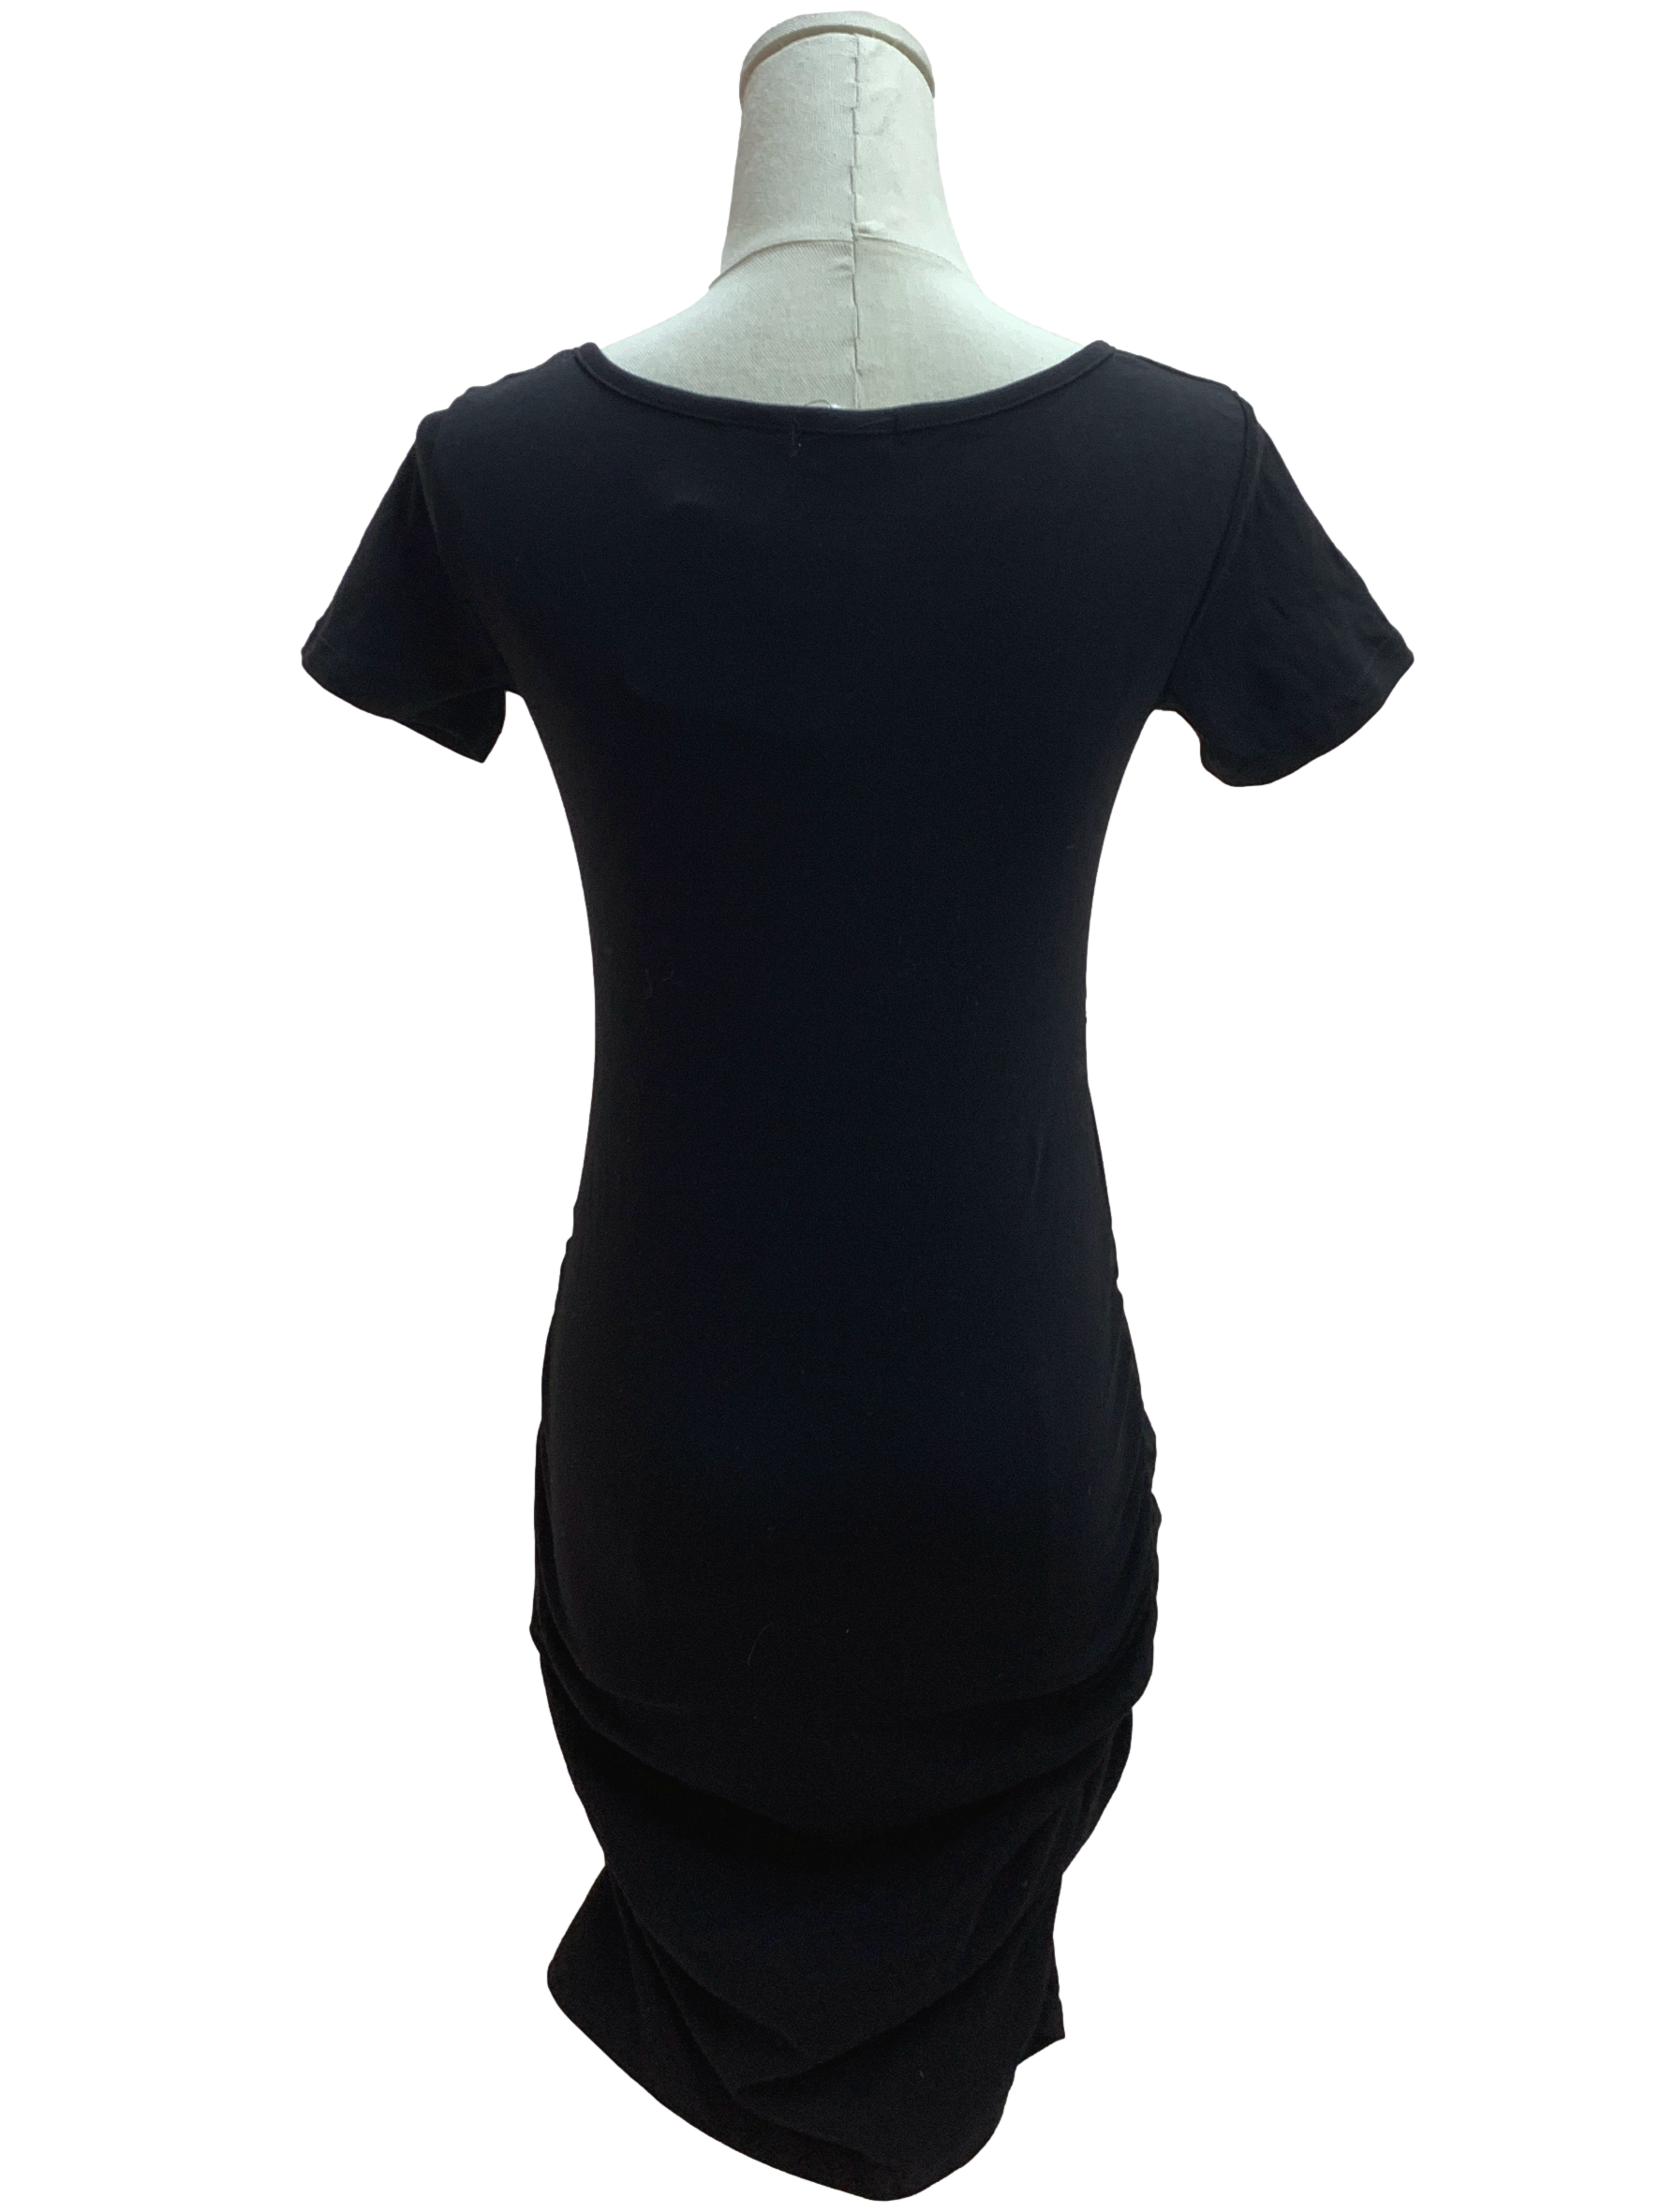 Pitch Black Ruched Dress